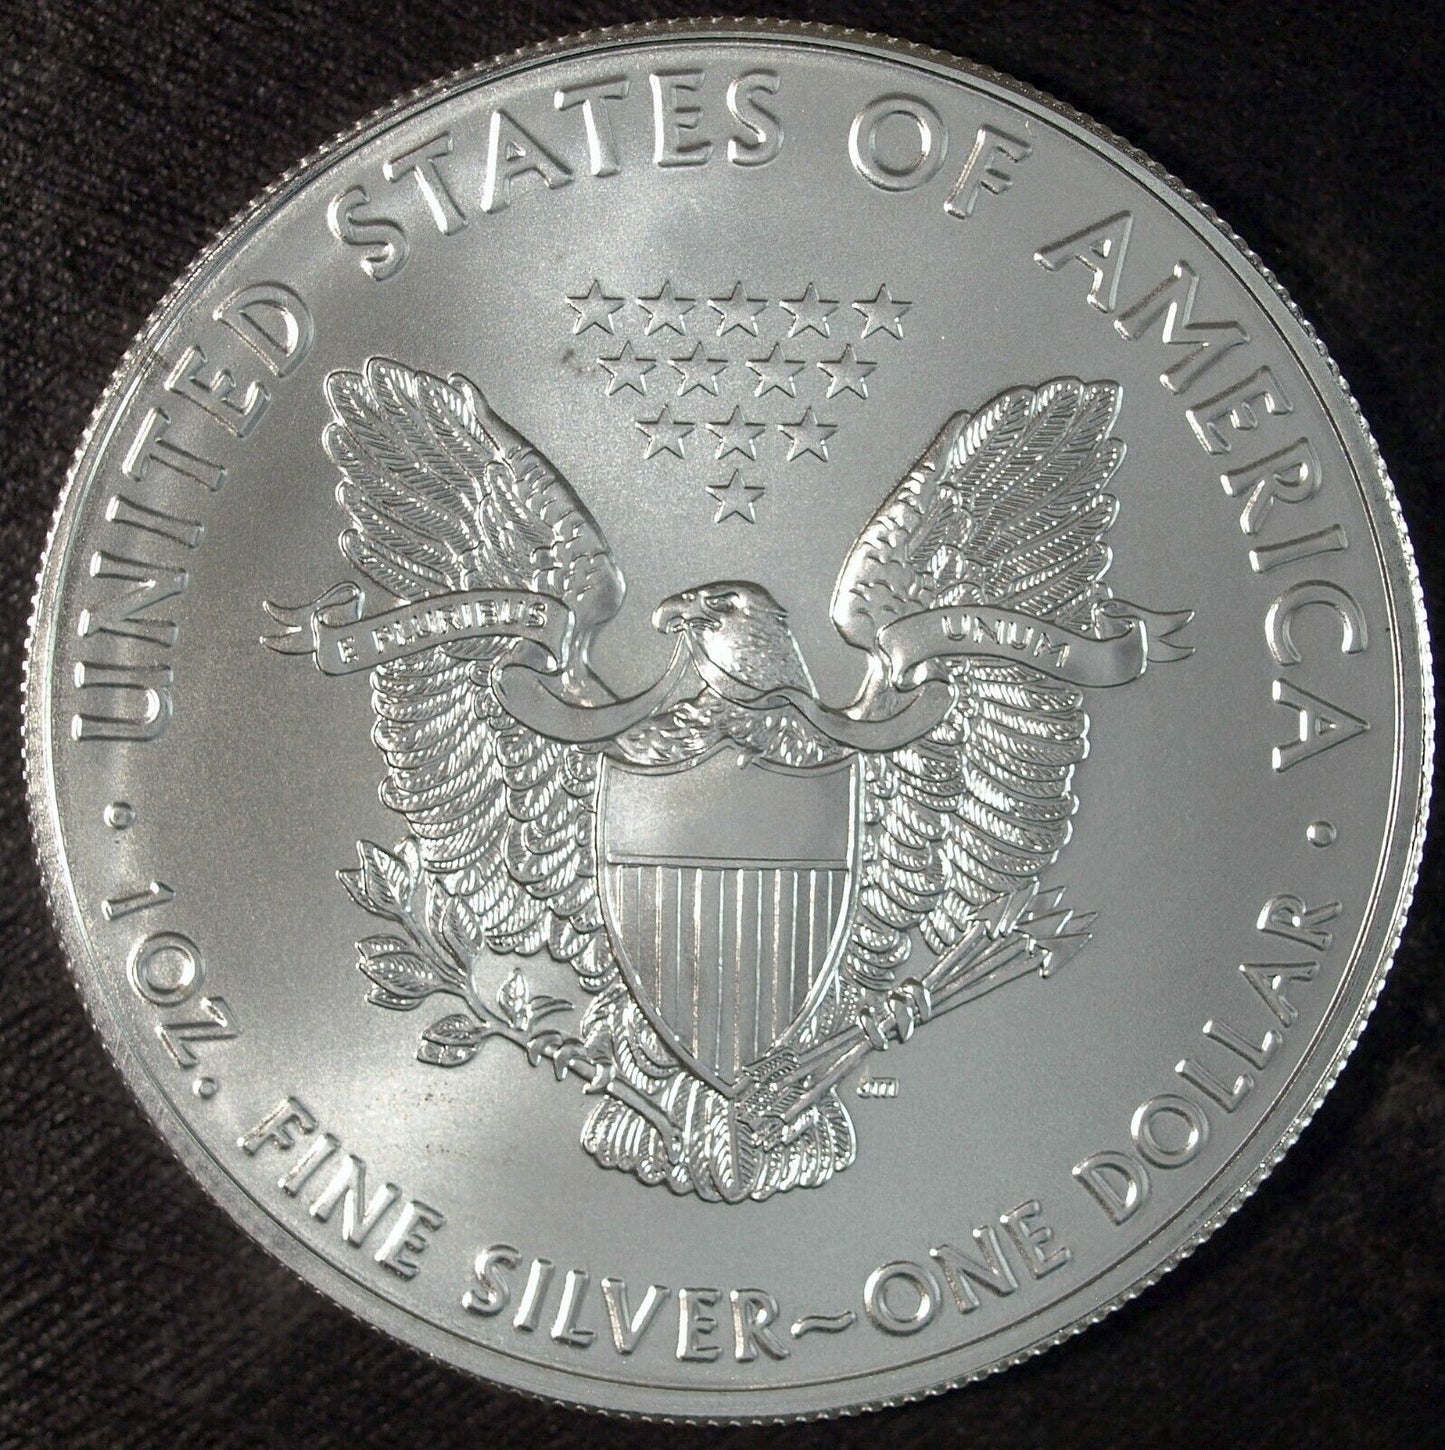 2020 American Silver Eagle ☆☆ Uncirculated ☆☆ Great Collectible 495